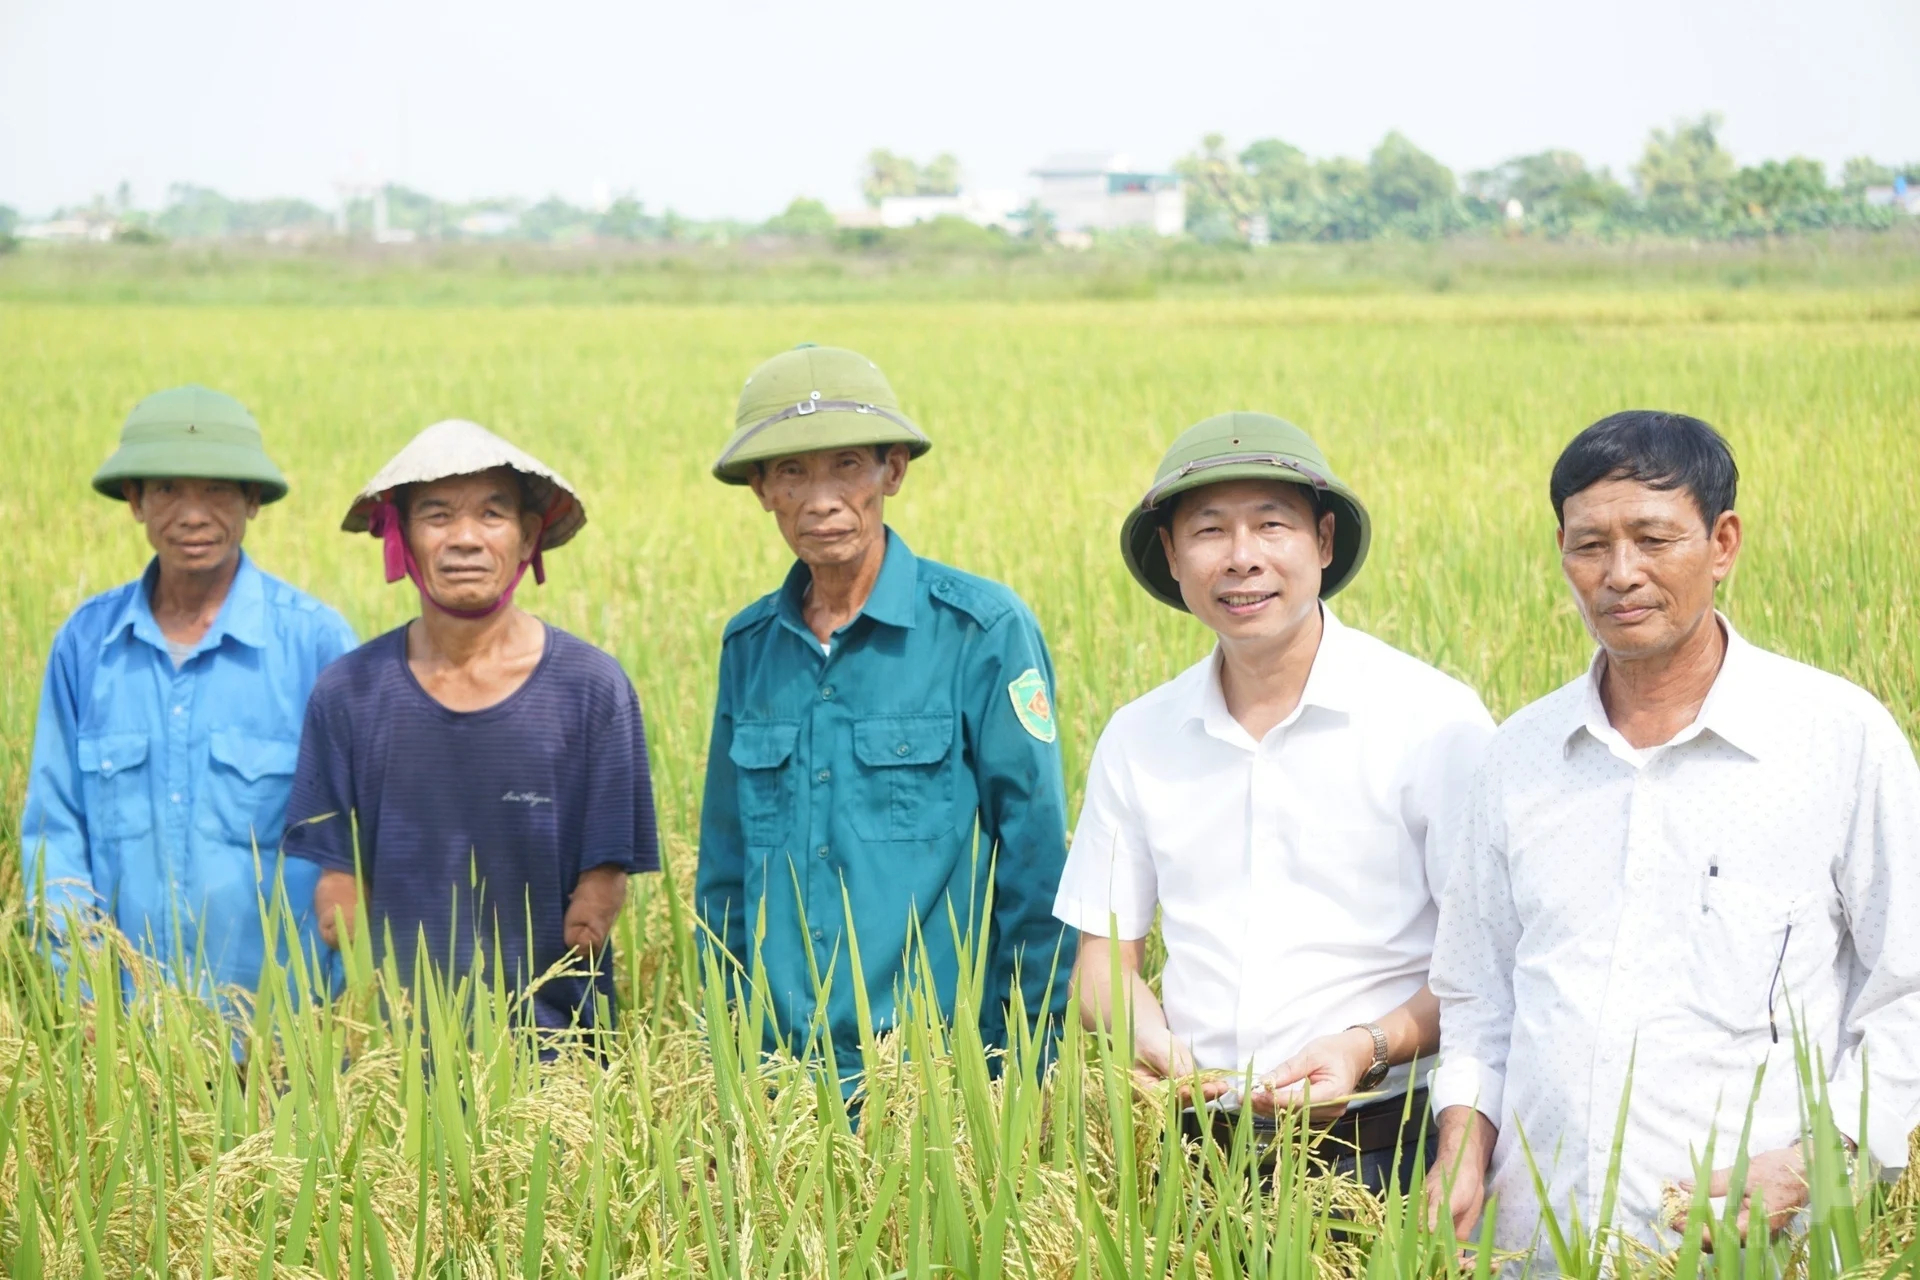 Dr. Nguyen Trong Quyen, Director of the Center for Research - Testing and Crop Services of Thanh Hoa Agriculture Institute (2nd from the right) visiting organic rice fields with people in Hop Nhat village, Te Nong commune. Photo: Quoc Toan.